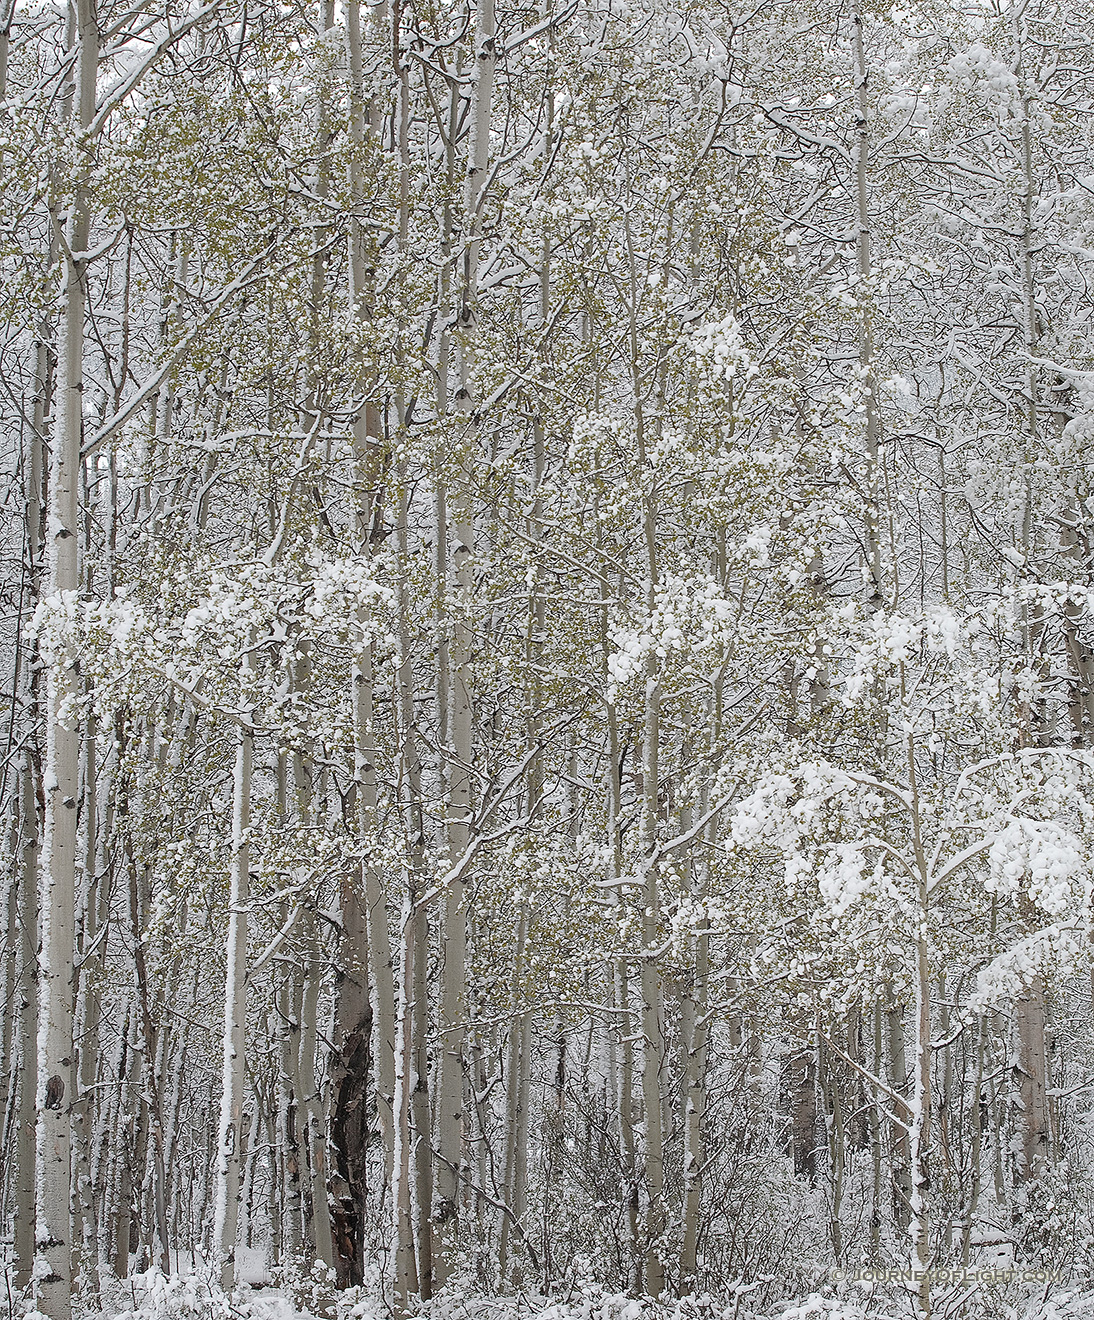 A soft blanket of snow clings to the trees in a forest in Kananaskis Country, Alberta. - Kananaskis Picture